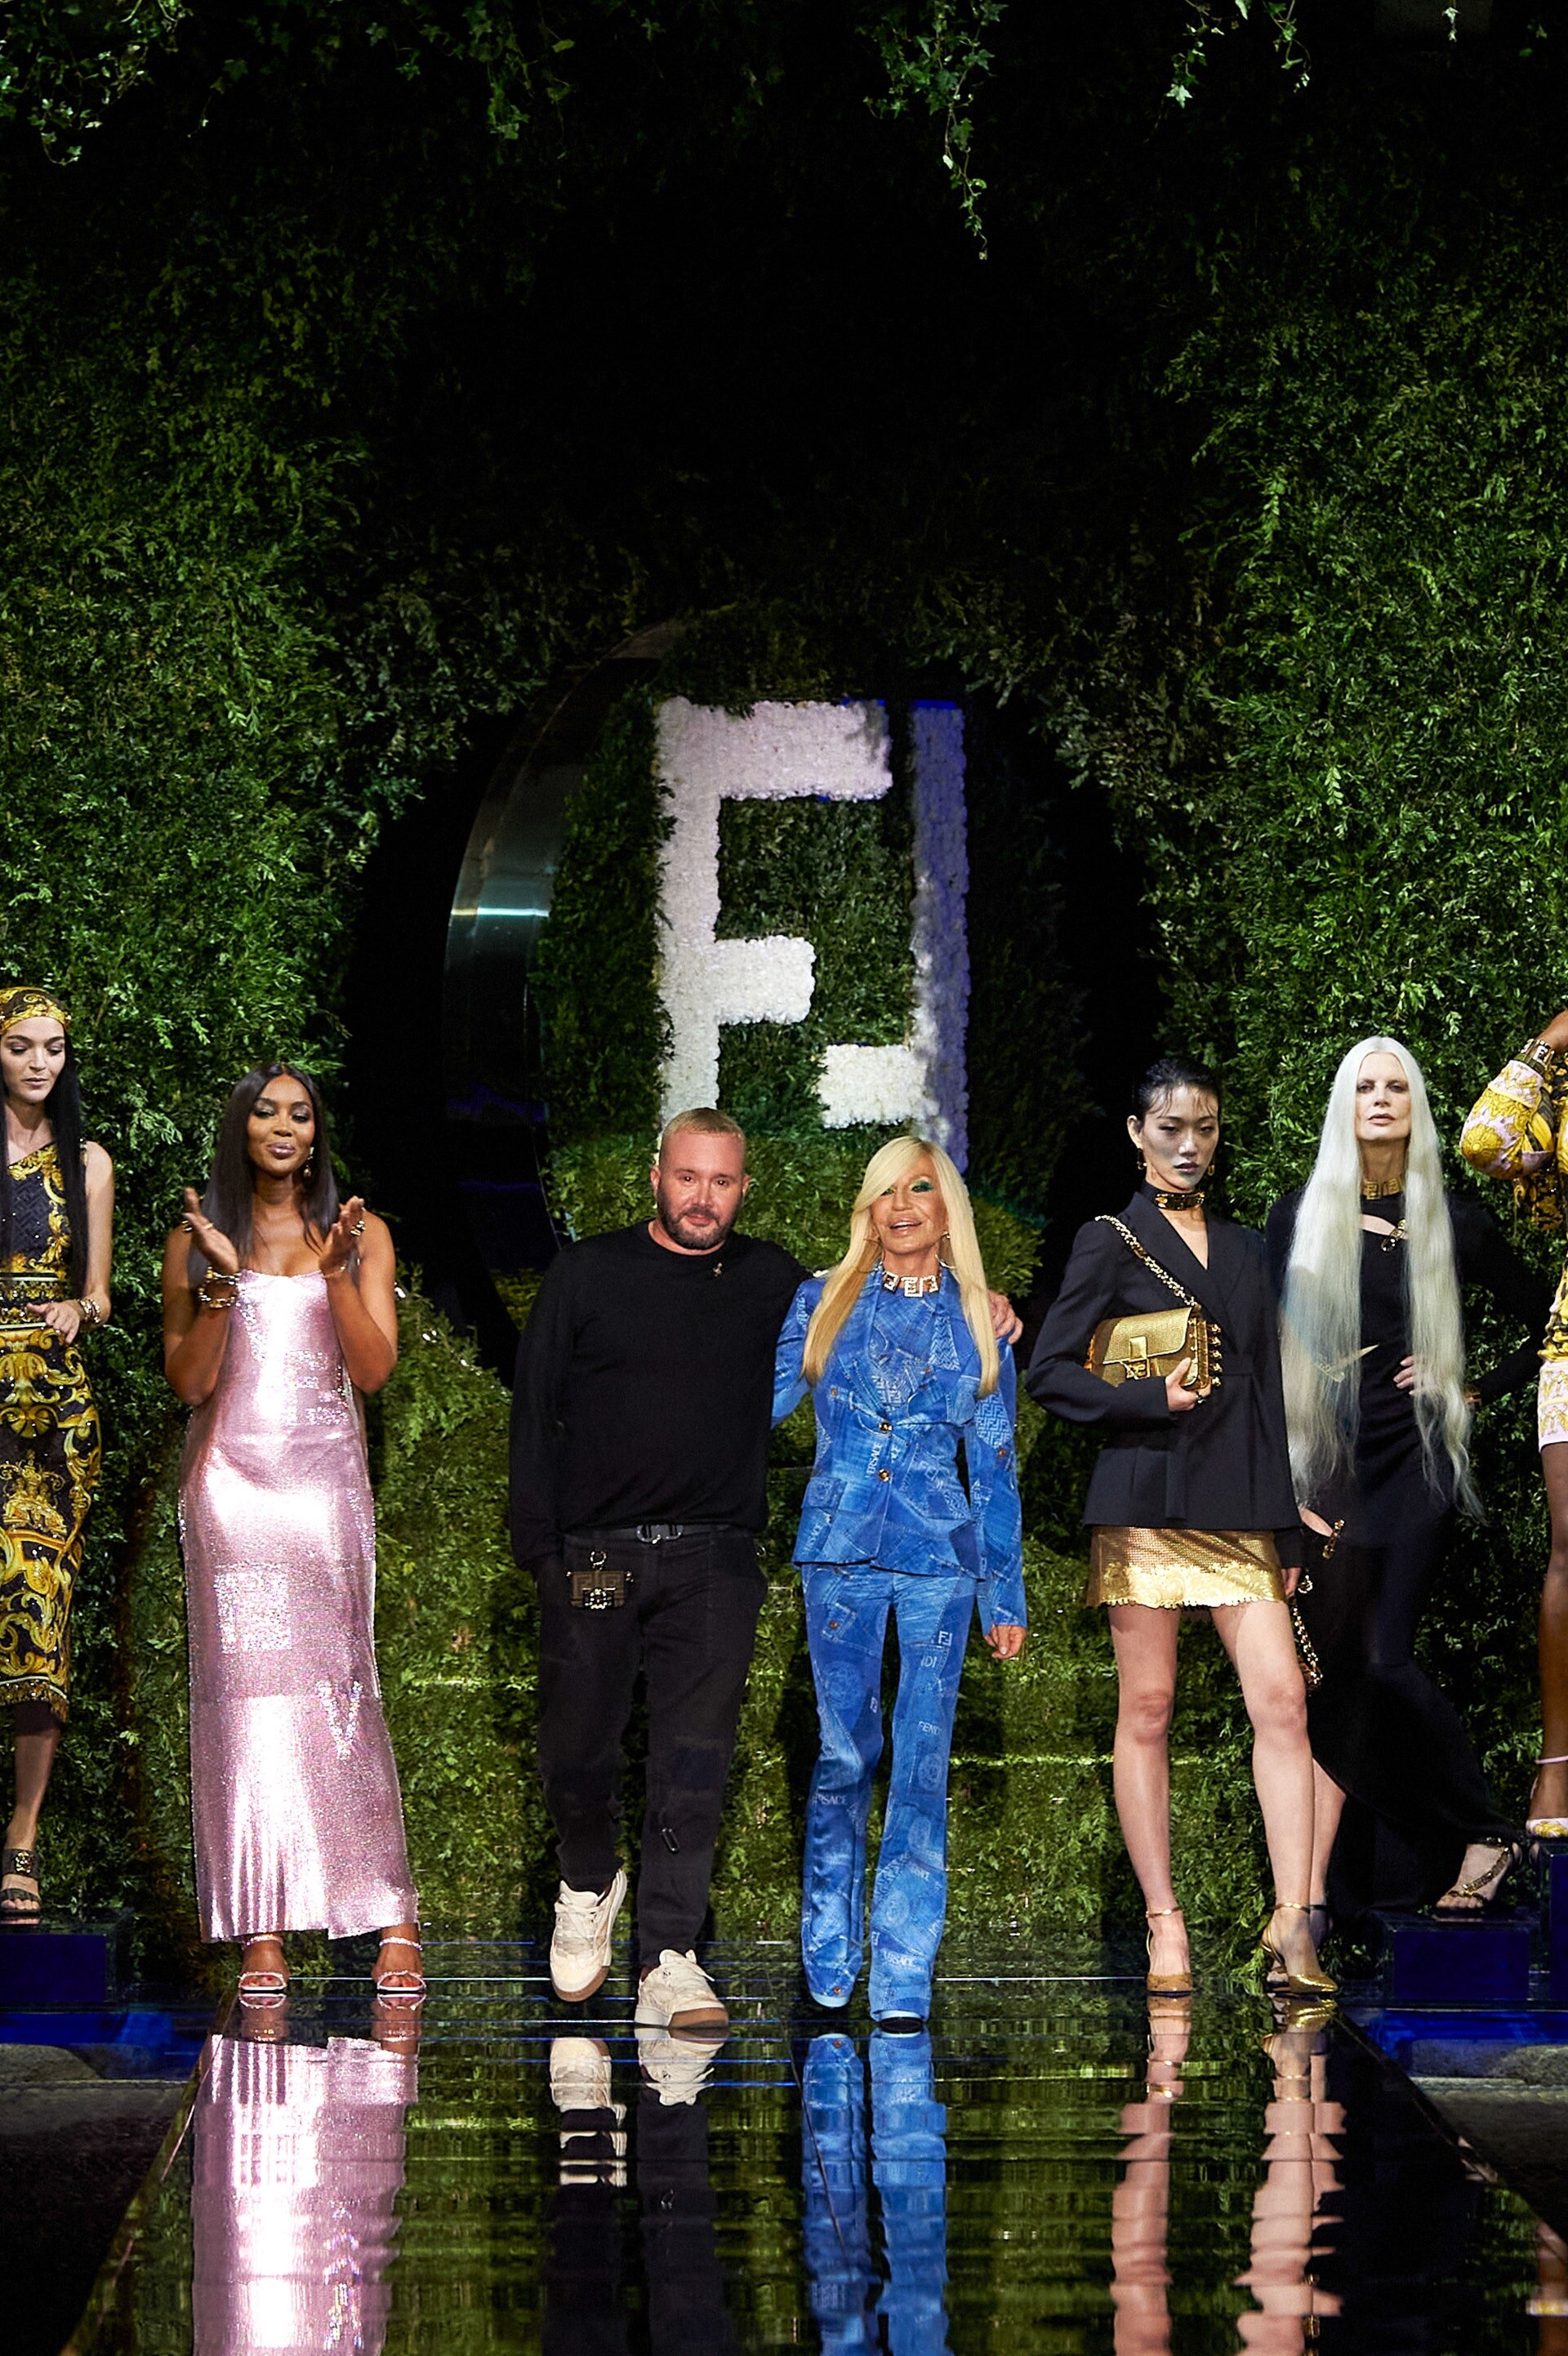 Maluma is the Face of VERSACE Spring Summer 2022 Men's Collection